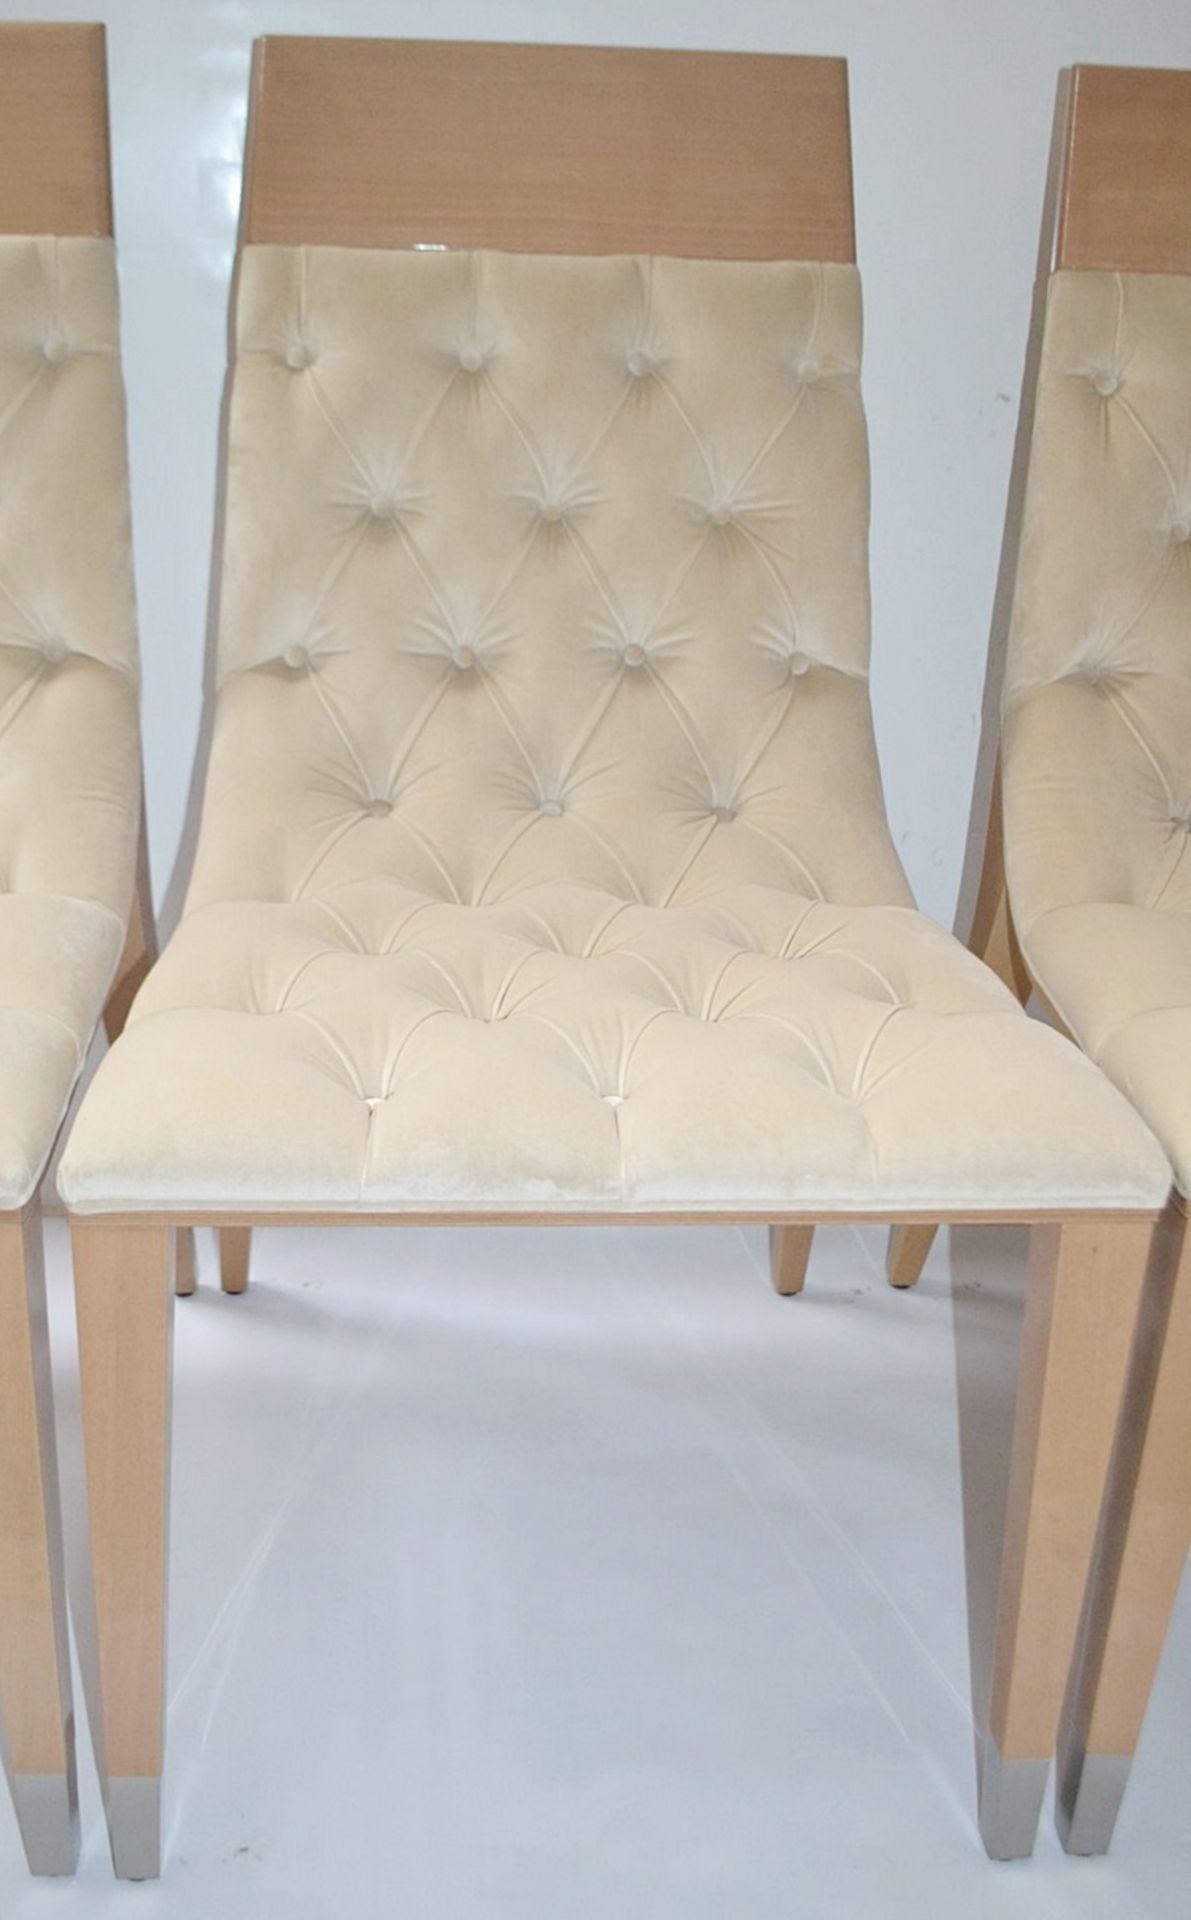 4 x GIORGIO COLLECTION 'Sunrise' Italian Designer Dining Chairs - Pre-owned In Good Condition - Image 14 of 14